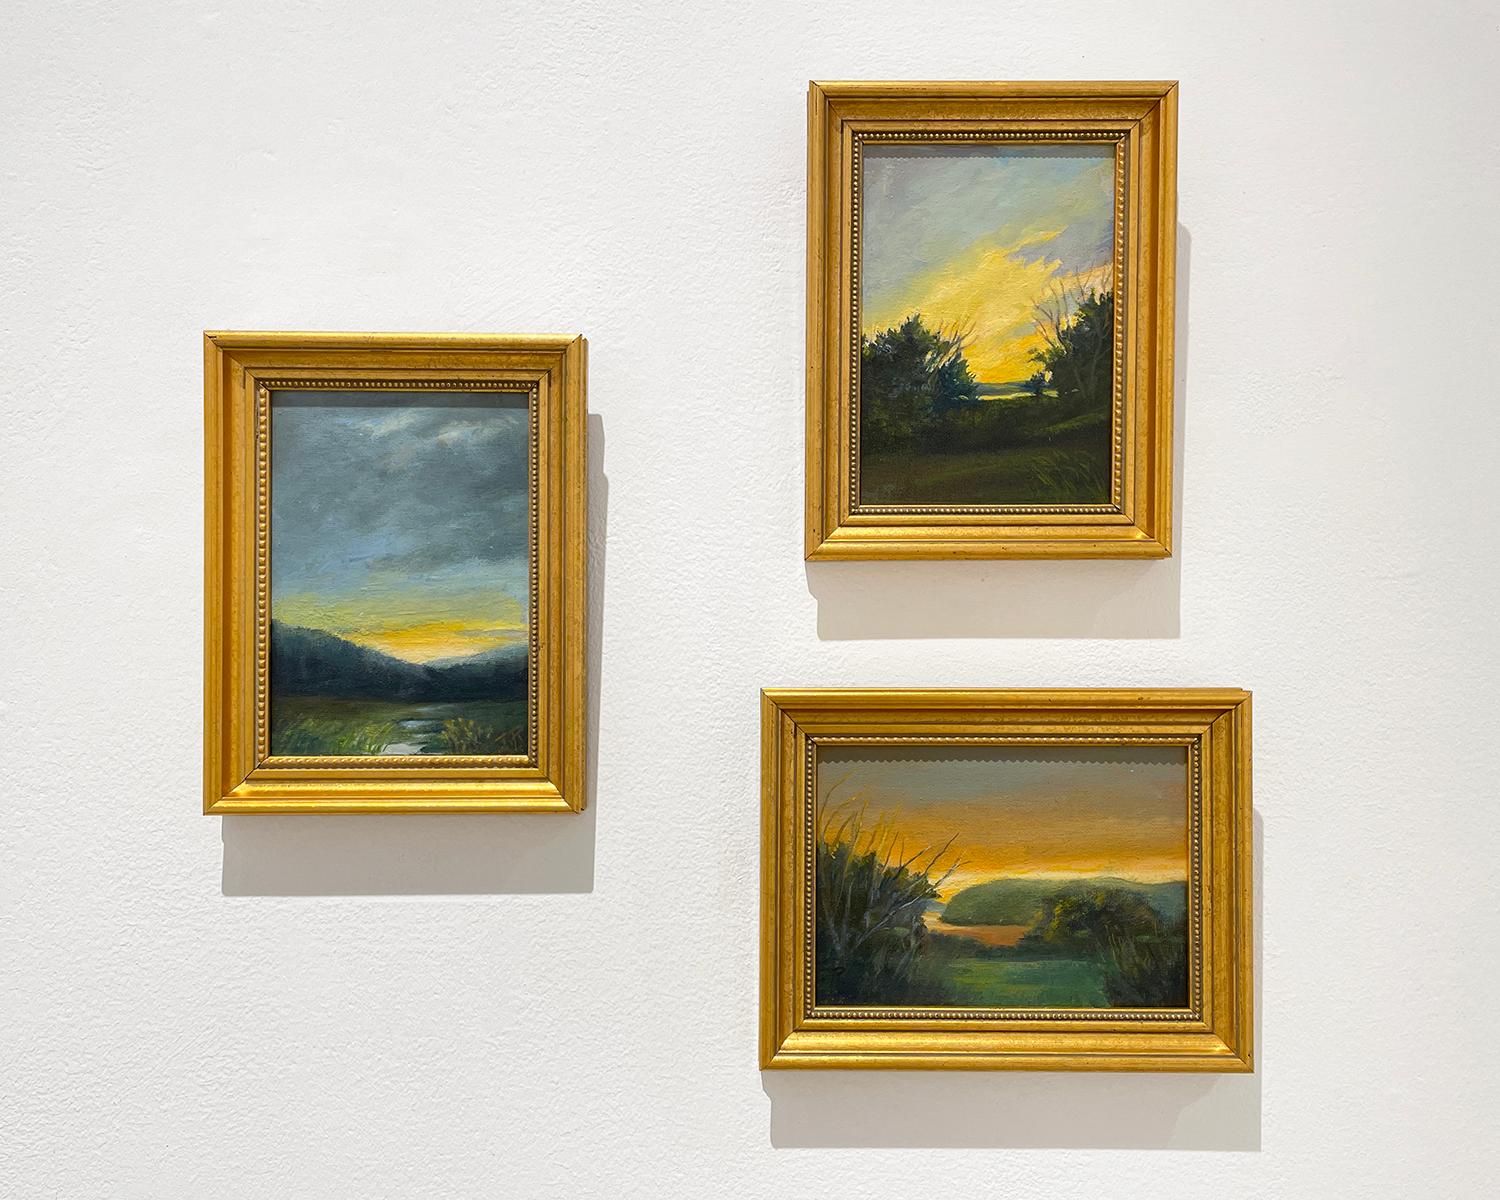 Soft Sky (Landscape Influenced by Hudson River School) by Judy Reynolds, 2023
5 x 7 inches, oil on canvas, gold frame, 6.5 x 8.5 inches framed
In a style reminiscent of the Hudson River School painters, Judy Reynolds realizes landscapes rife with